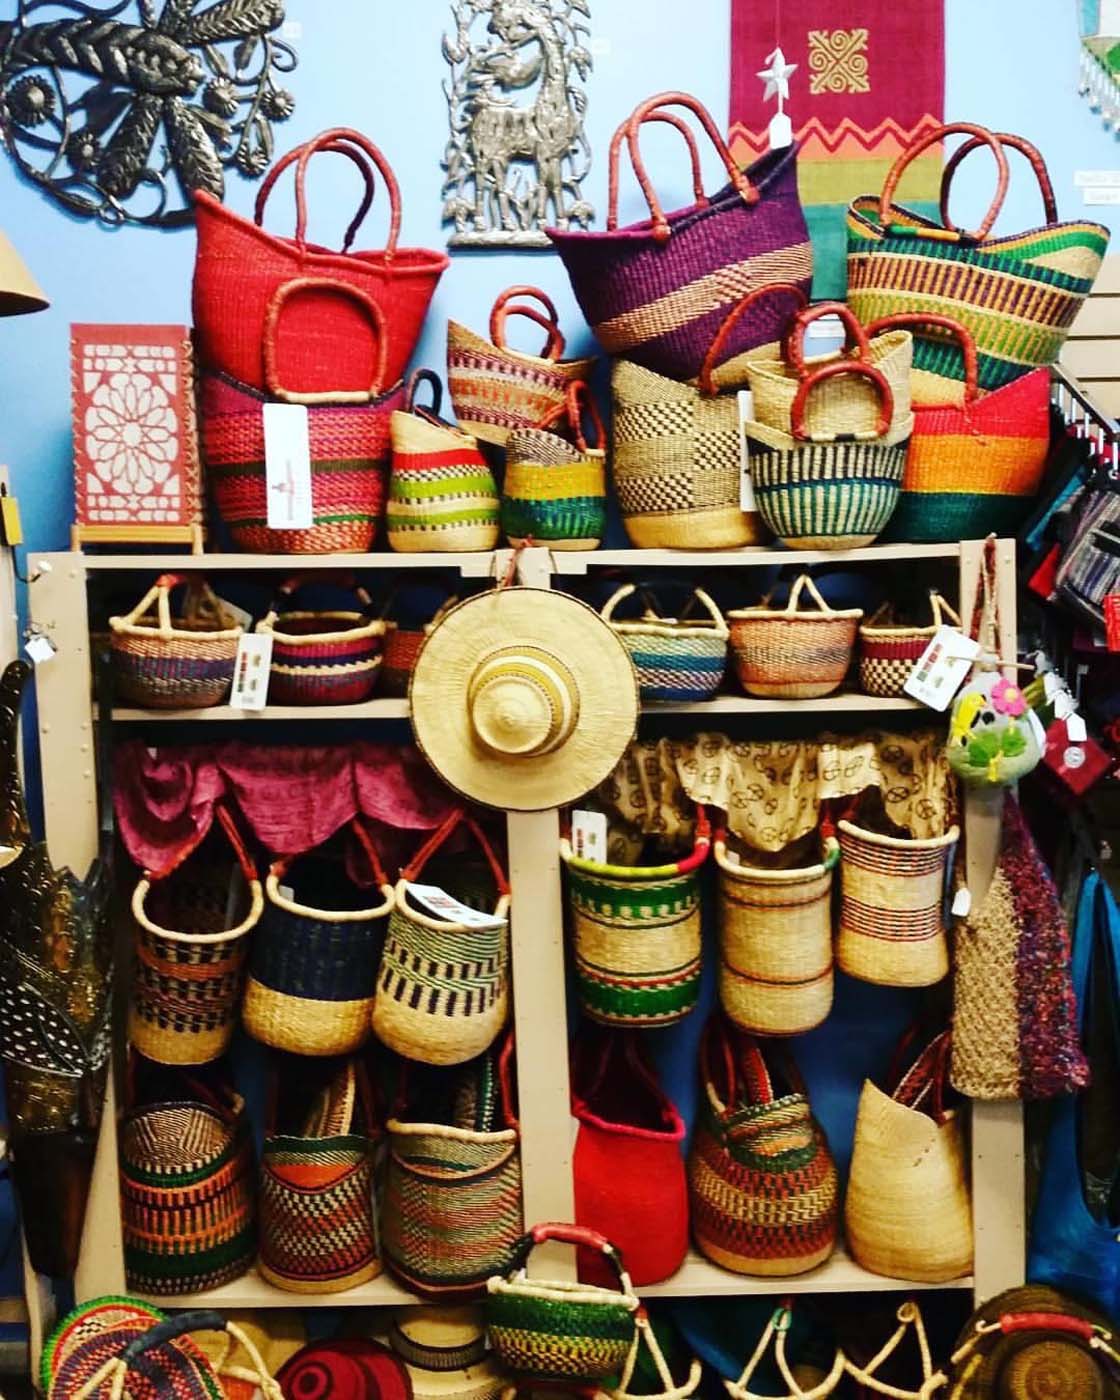 Simple store shelves are brightened by Bolga baskets